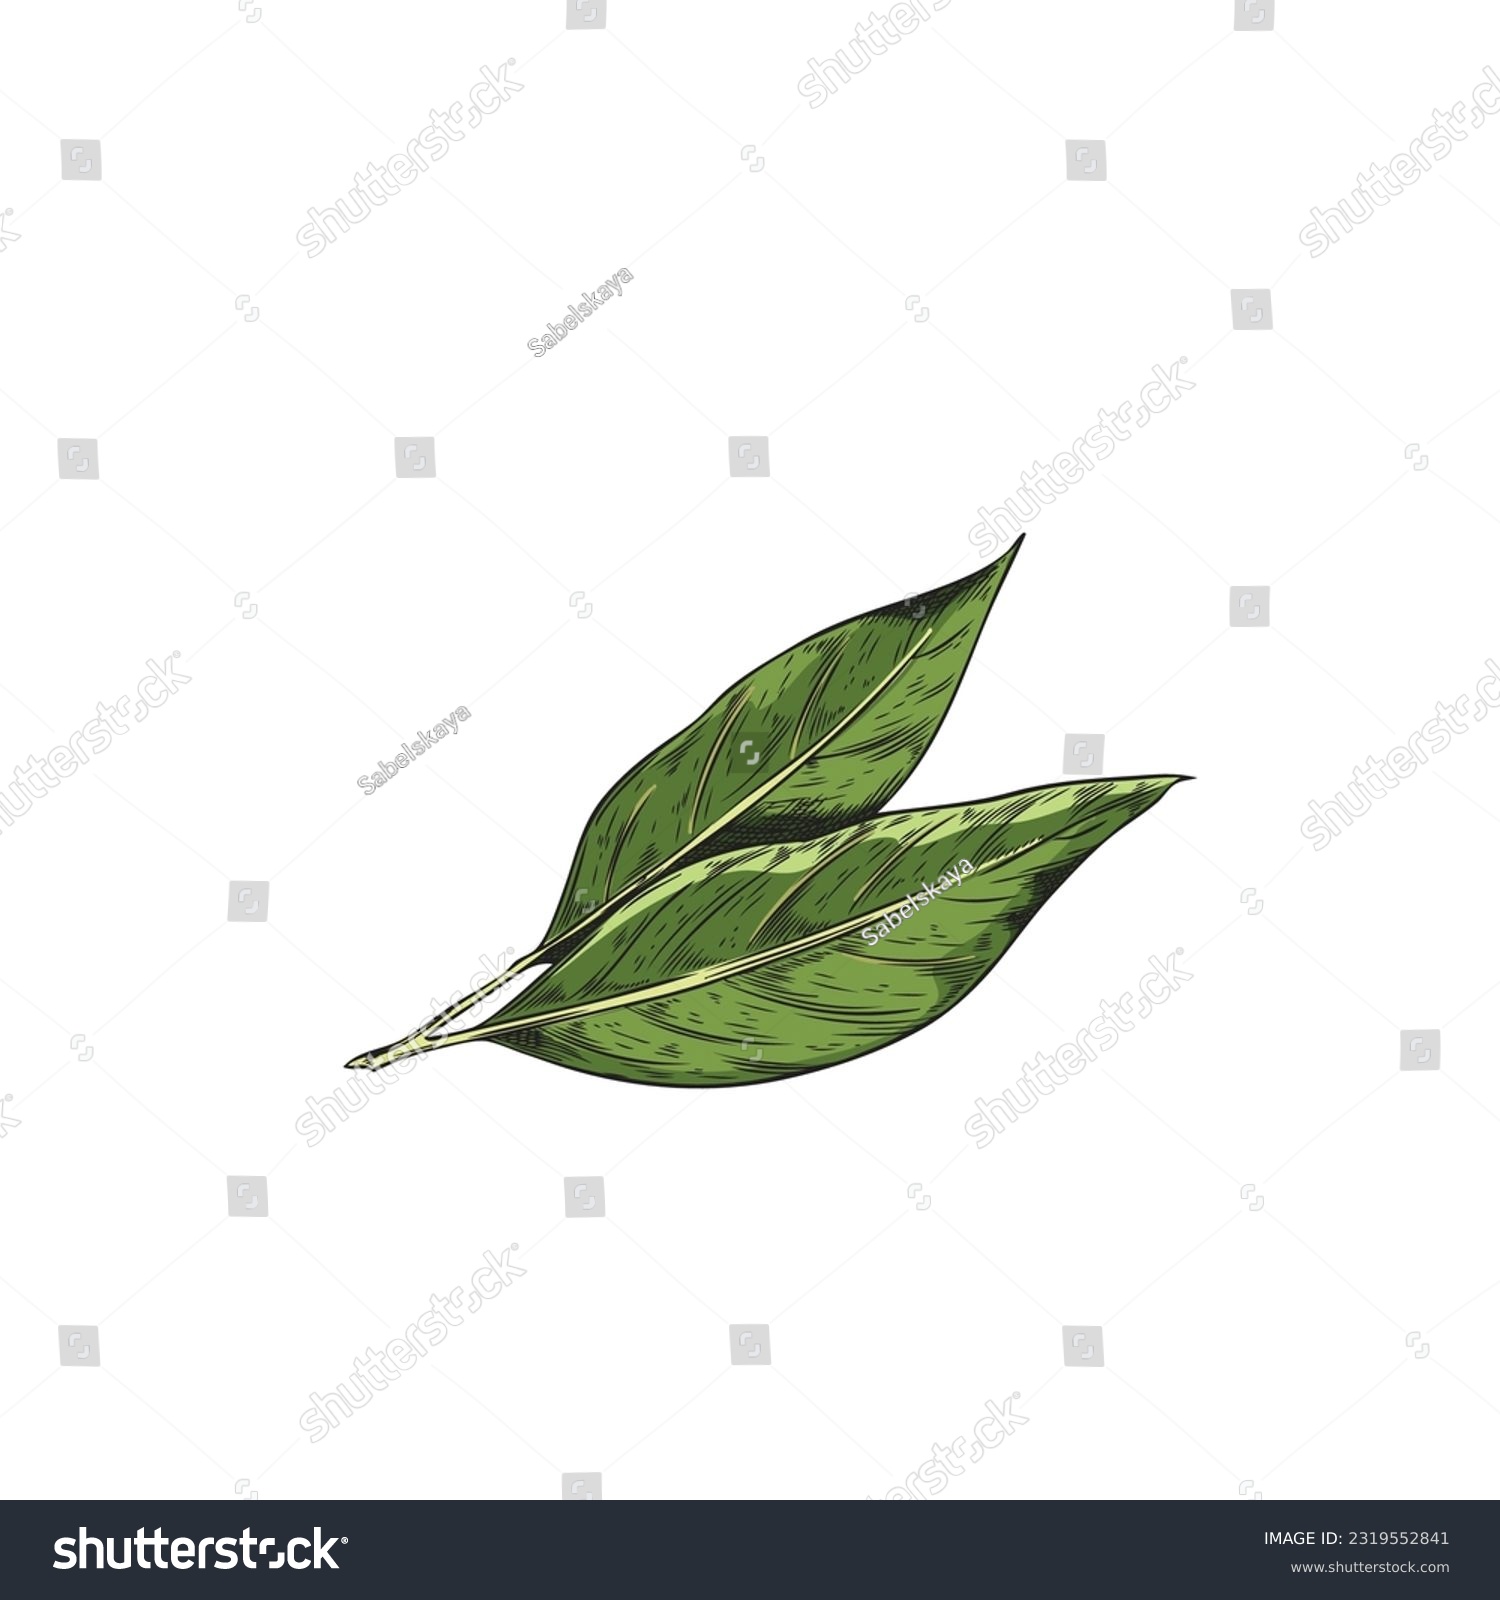 SVG of Hand drawn branch bay leaf. Green tea leaves. Colorfull vector realistic sketch illustration of bay leaves isolated on white background. Herbs, spices, natural flavors concept svg